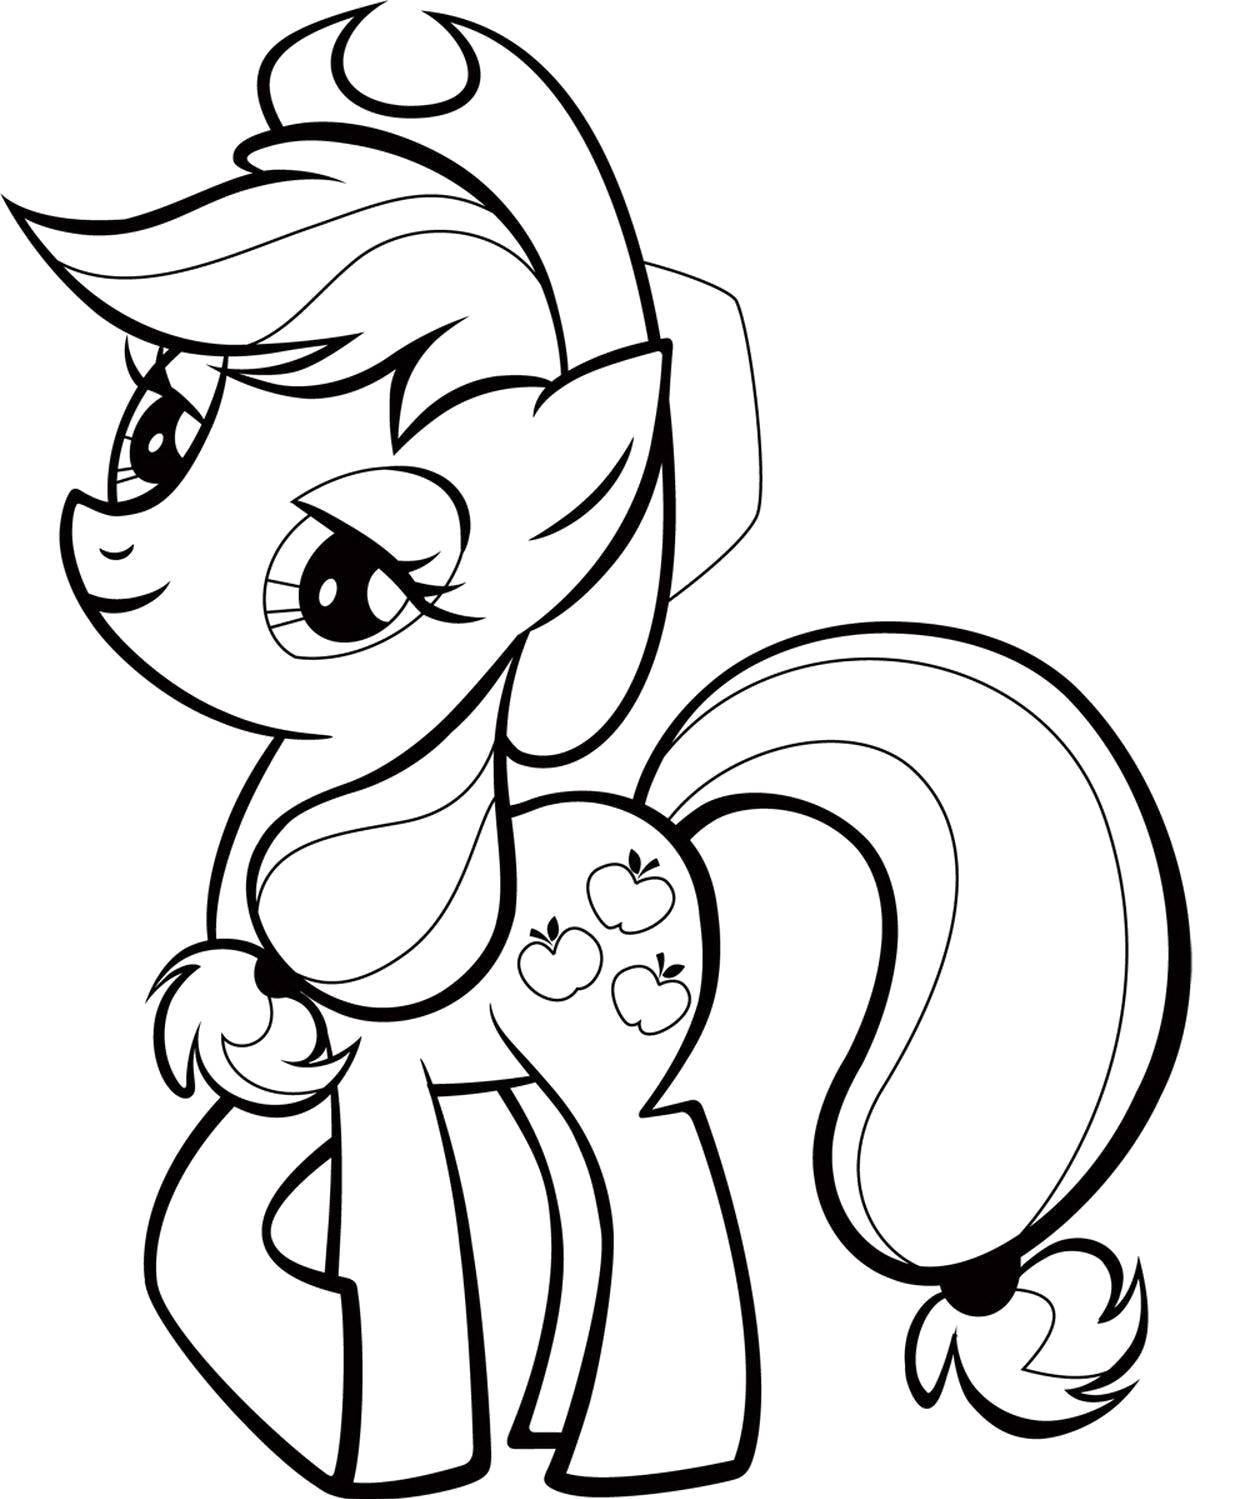 Coloring Ponies from my little pony the cowboy. Category Ponies. Tags:  Pony, My little pony.